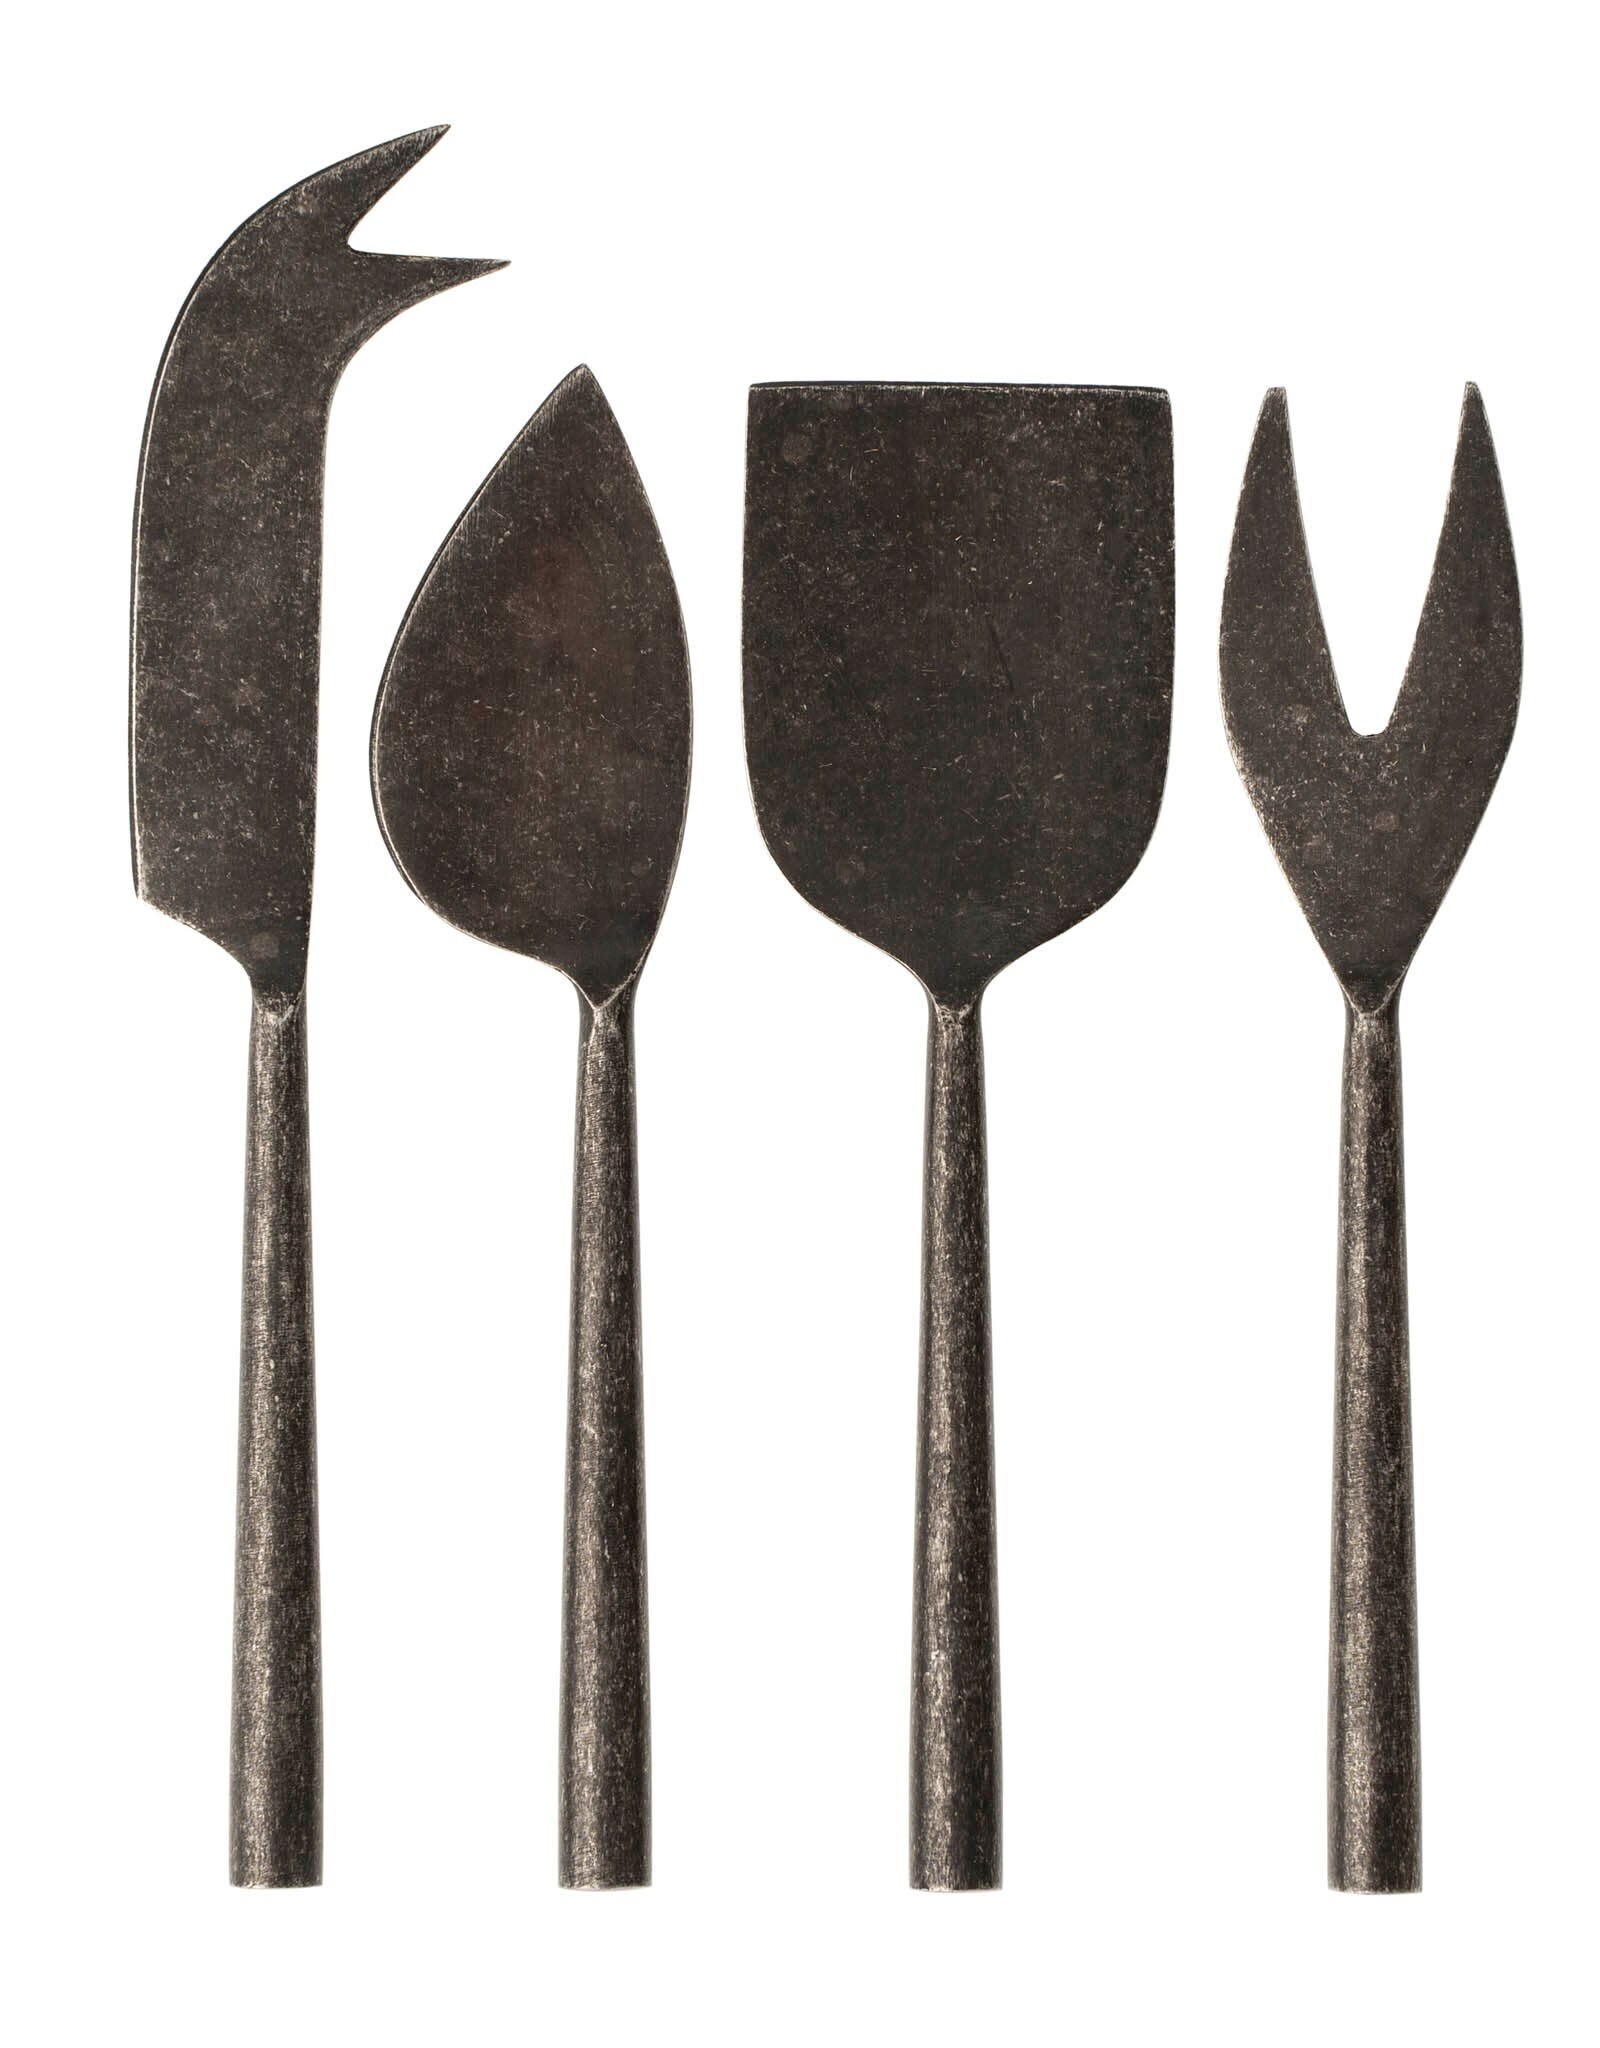 Tides Cheese Knives S/4